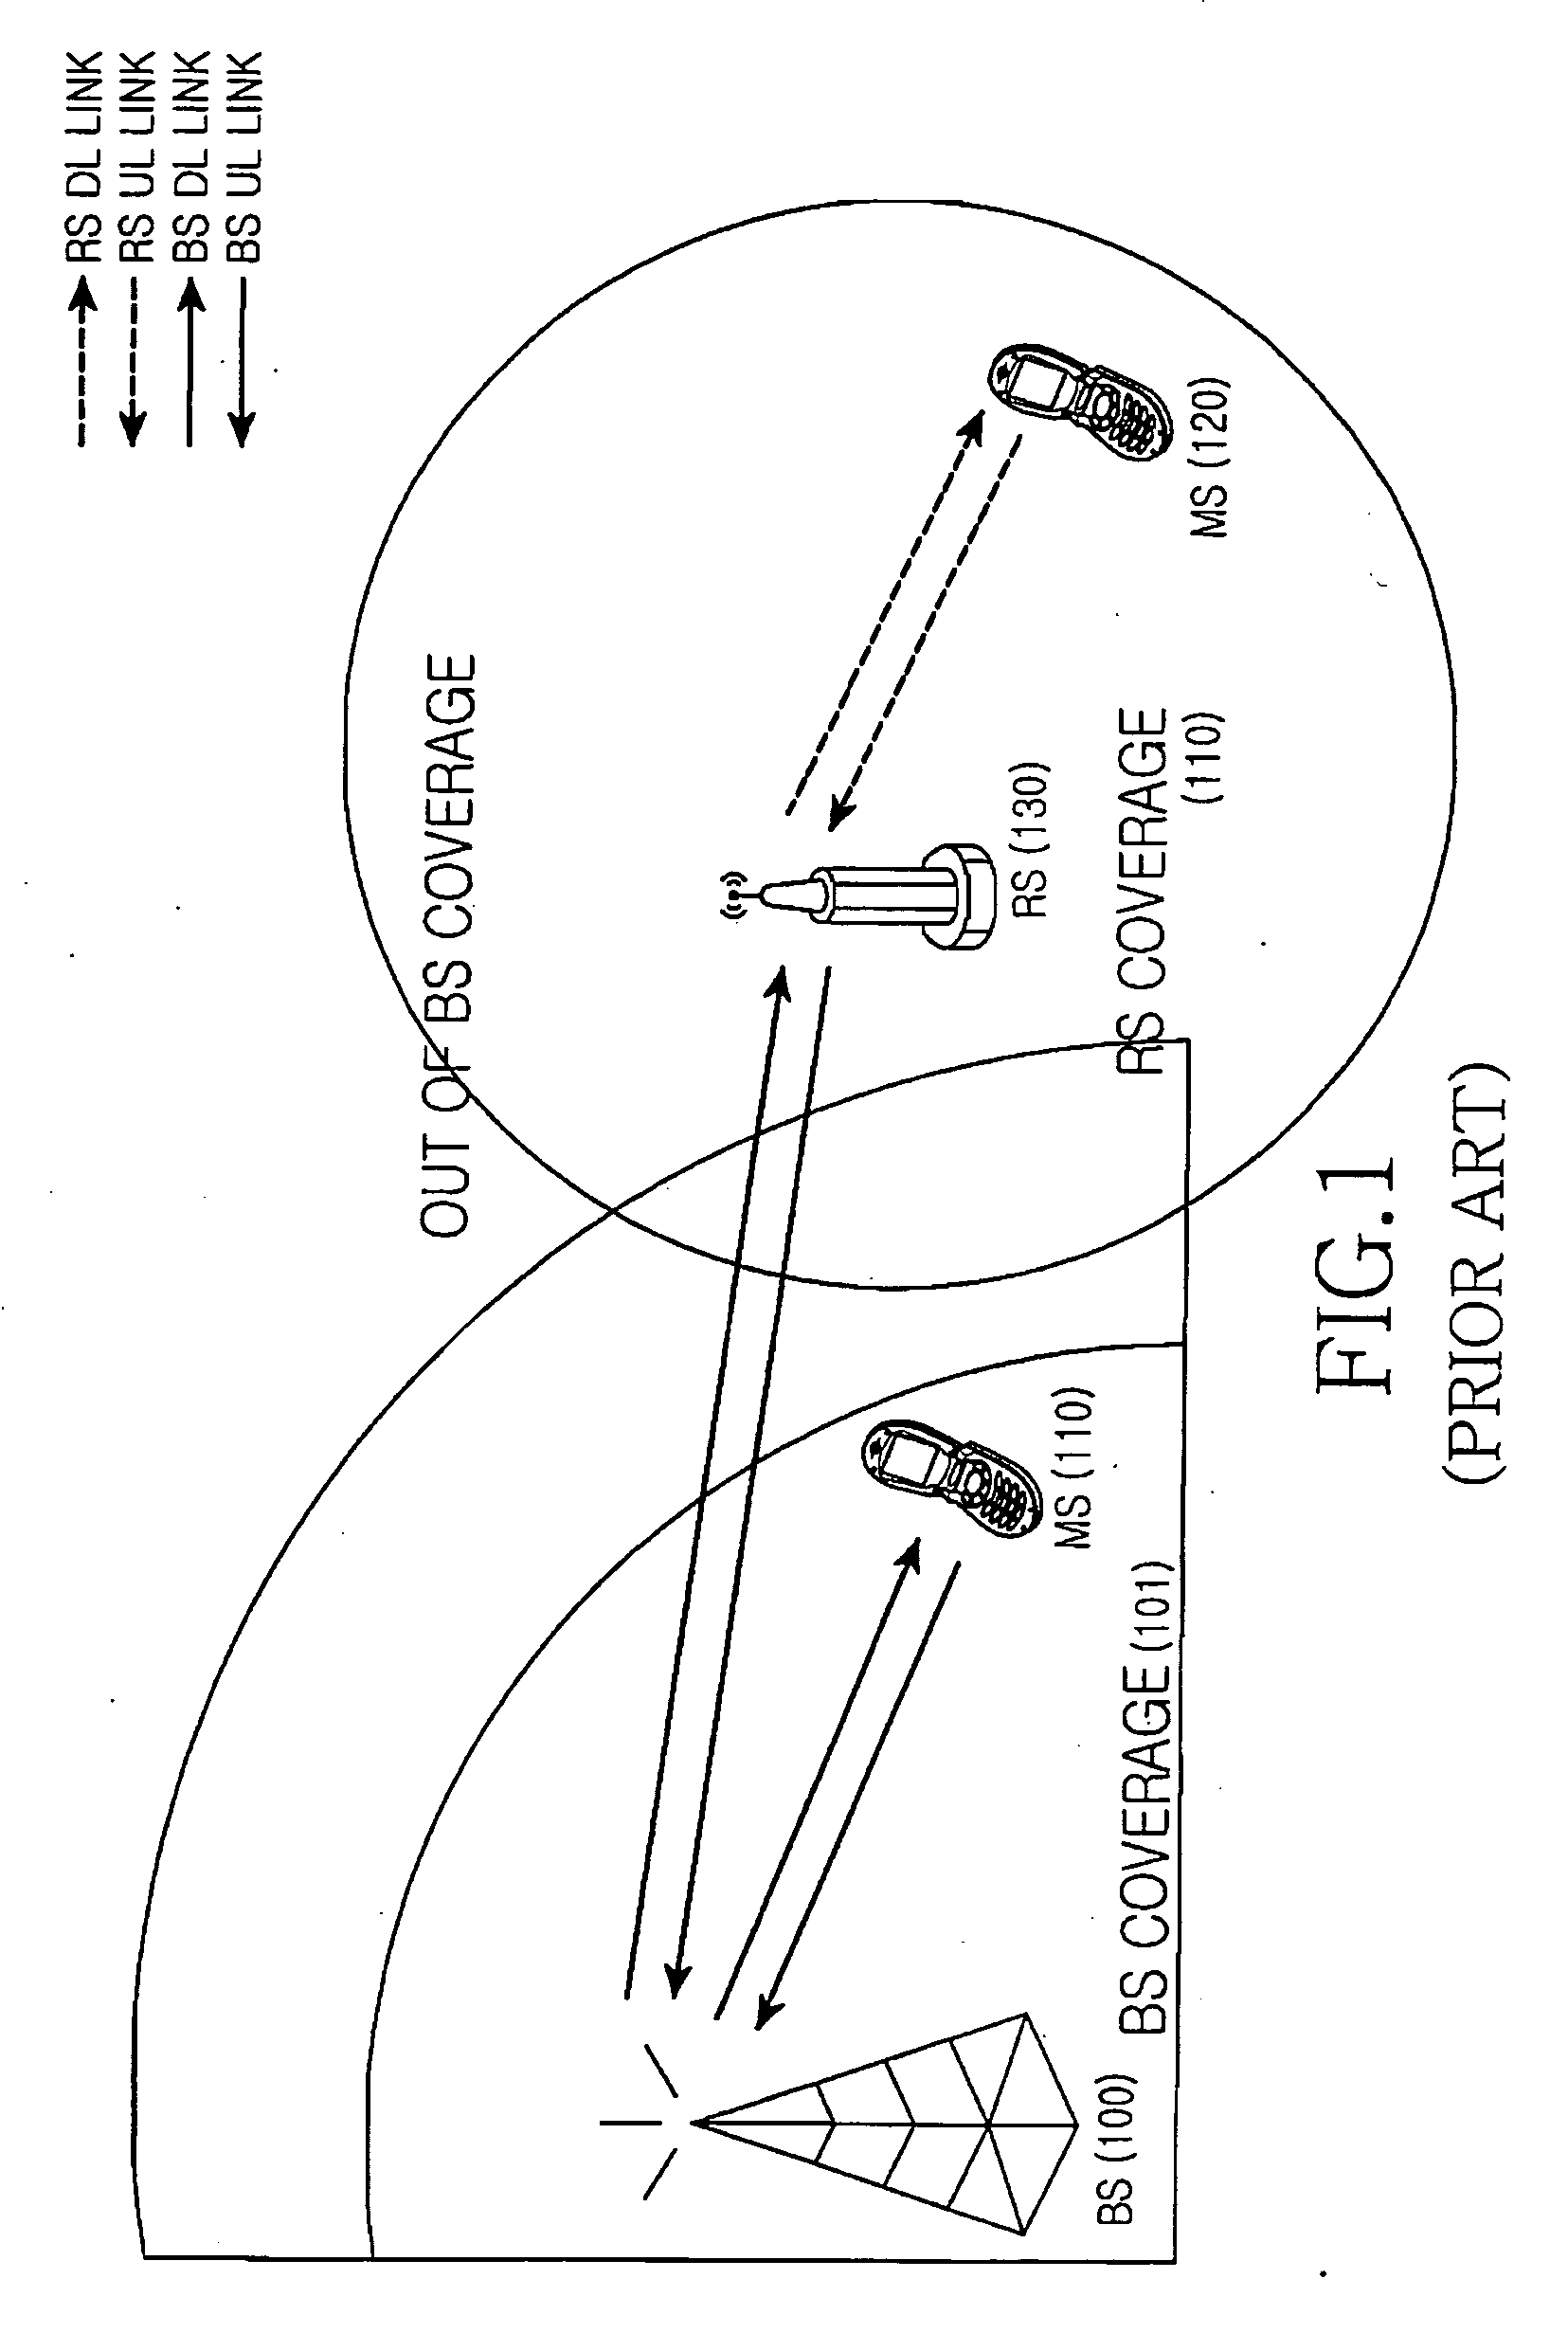 Apparatus and method for transmitting data using adaptive modulation and coding in mobile communication system having a relay station